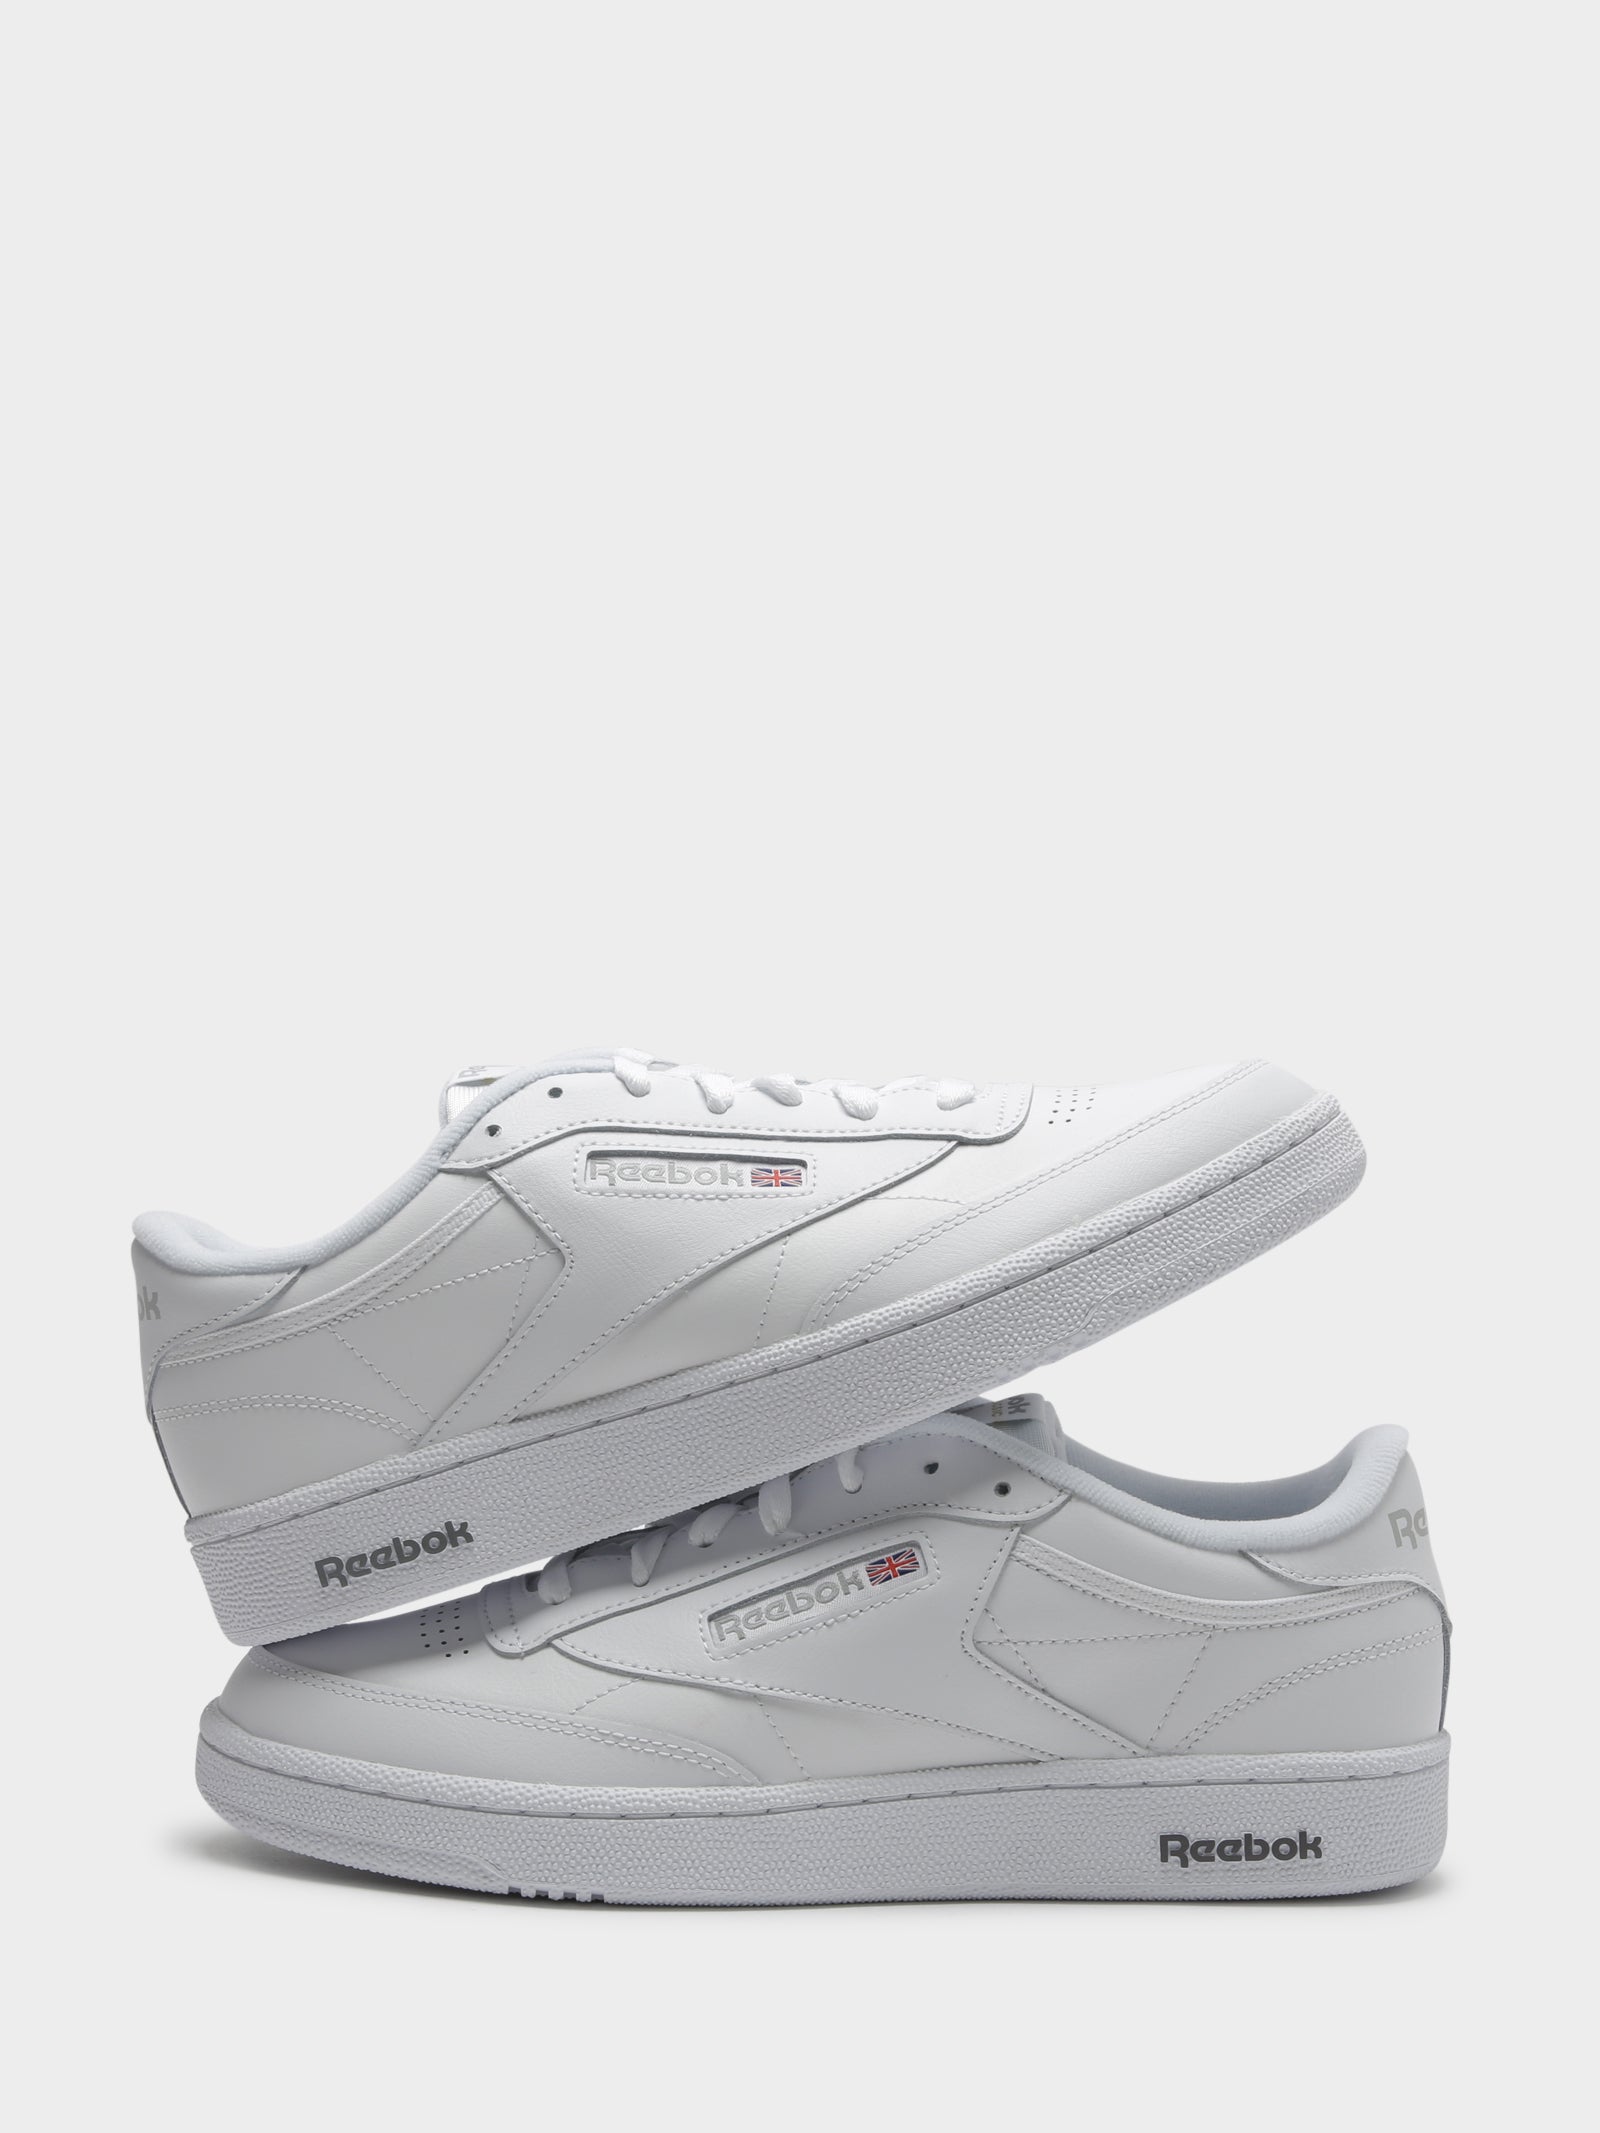 Unisex Club C Sneakers in White & Grey Leather Glue Store